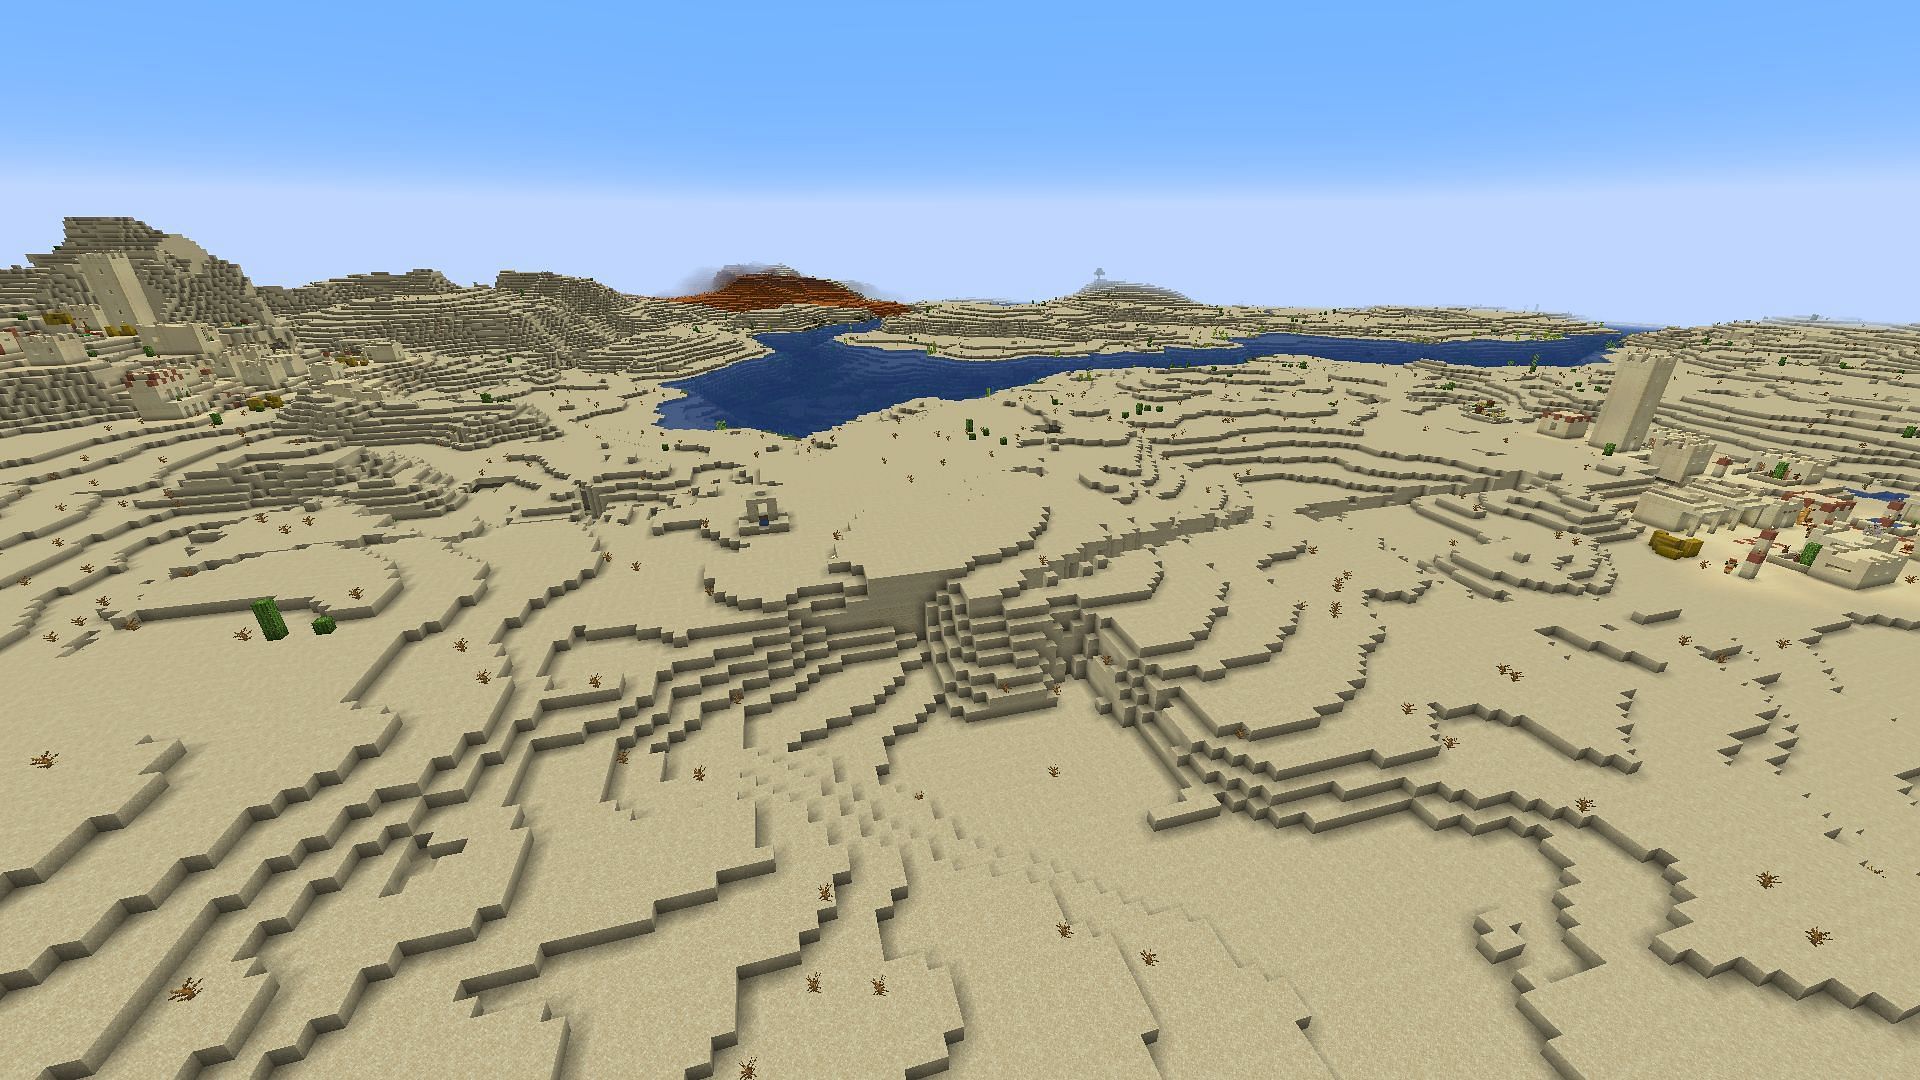 The home desert biome in this Minecraft seed offers ample archeologic opportunities (Image via Mojang)